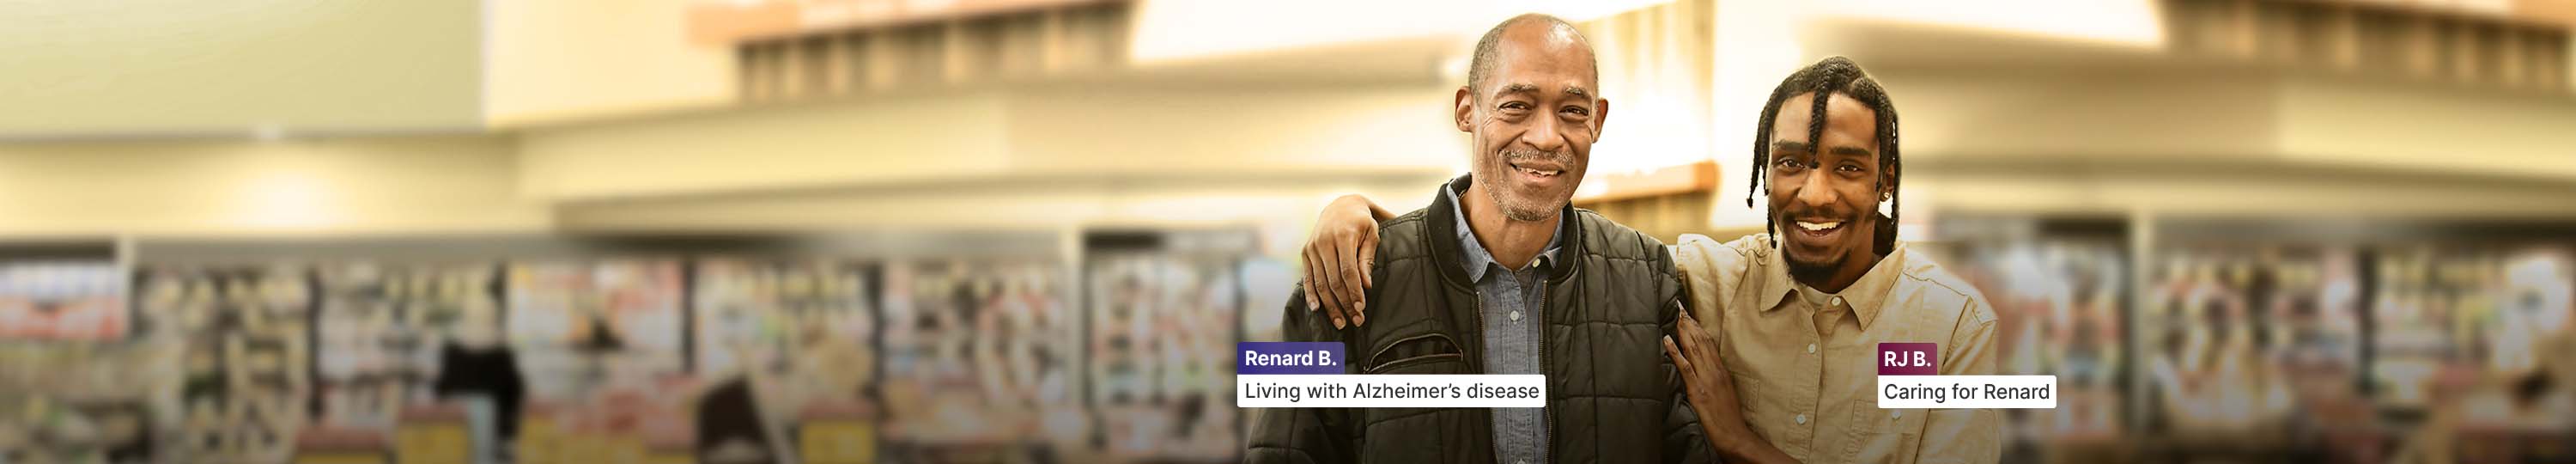 Renard, who is living with Alzheimer’s disease, arm in arm with RJ, his care partner, in a supermarket